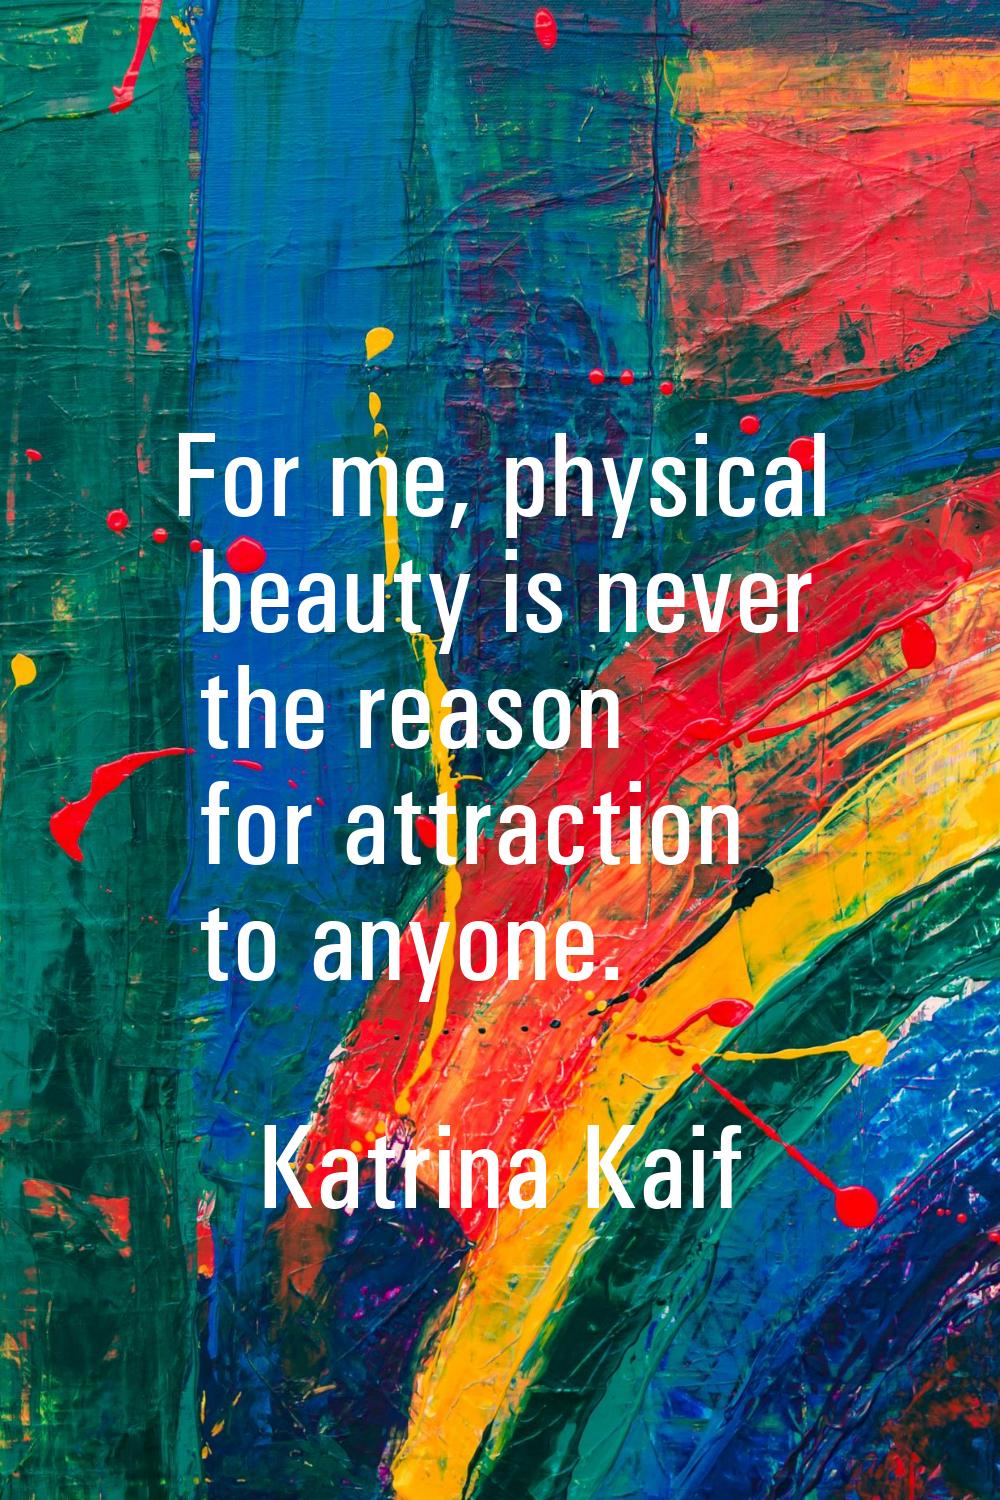 For me, physical beauty is never the reason for attraction to anyone.